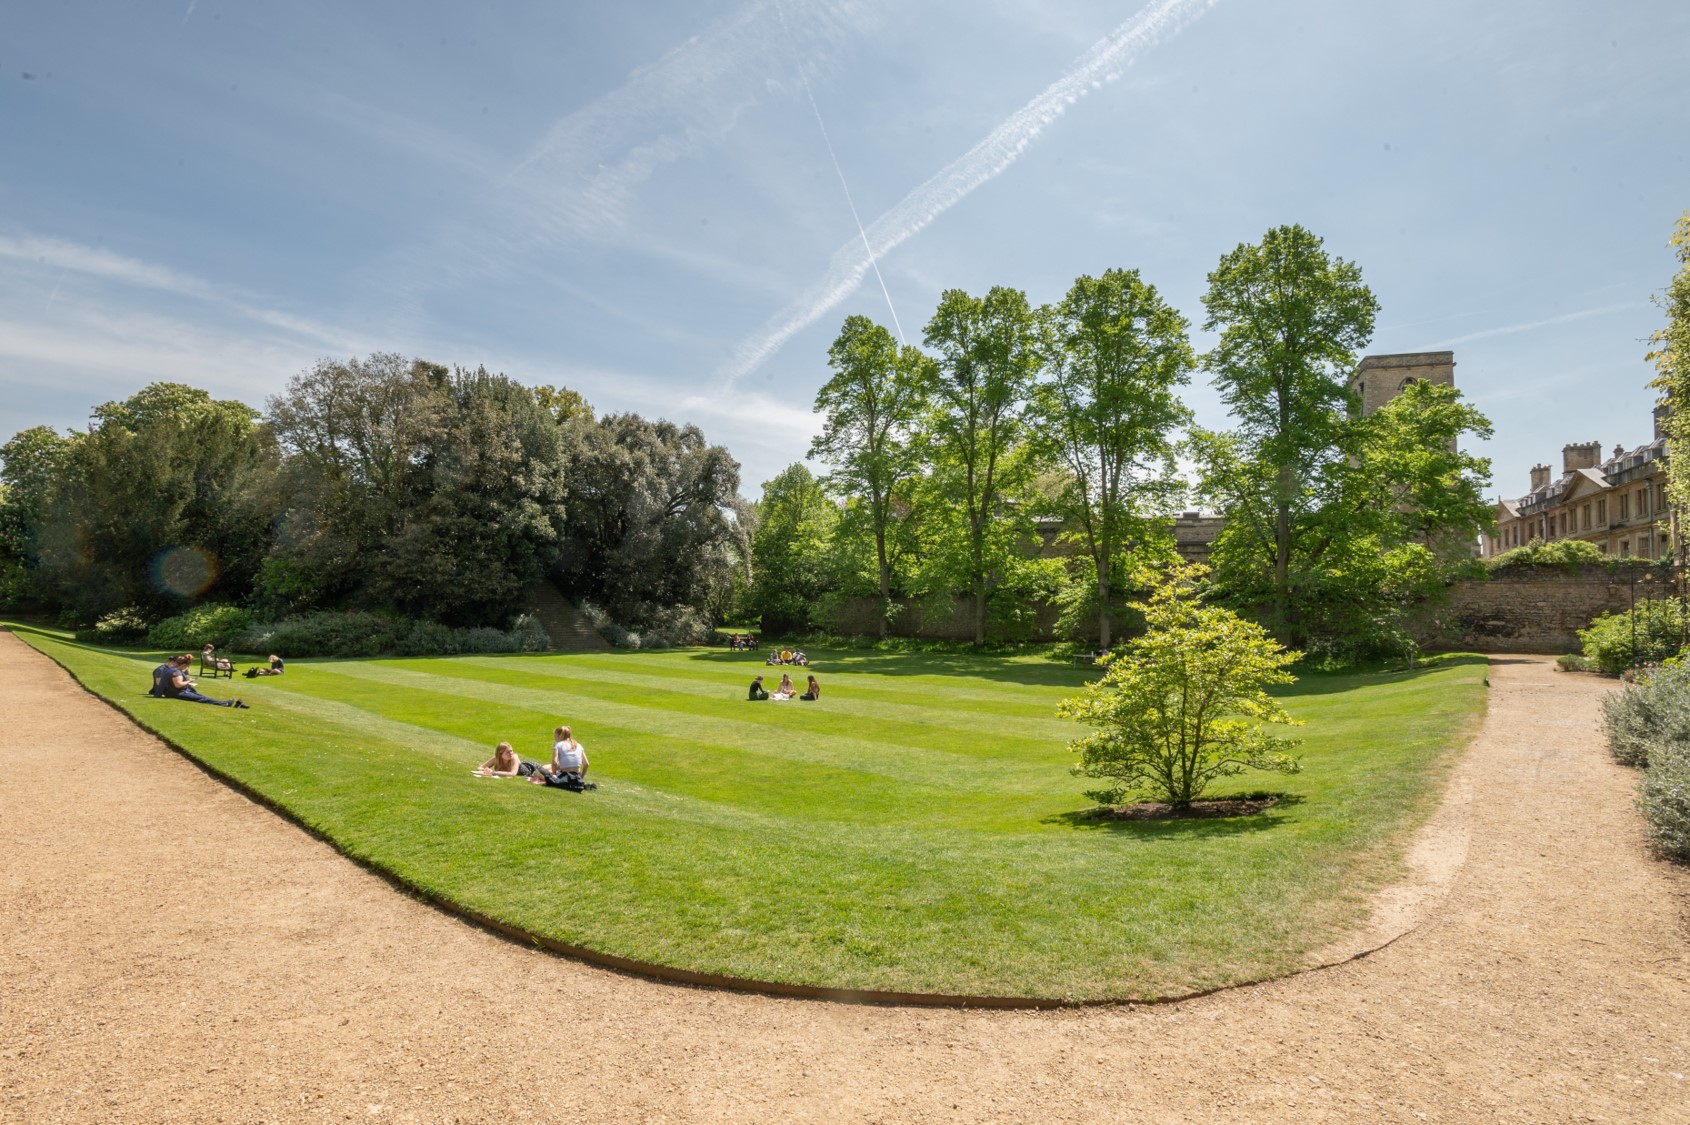 Students lying on the grass in the gardens